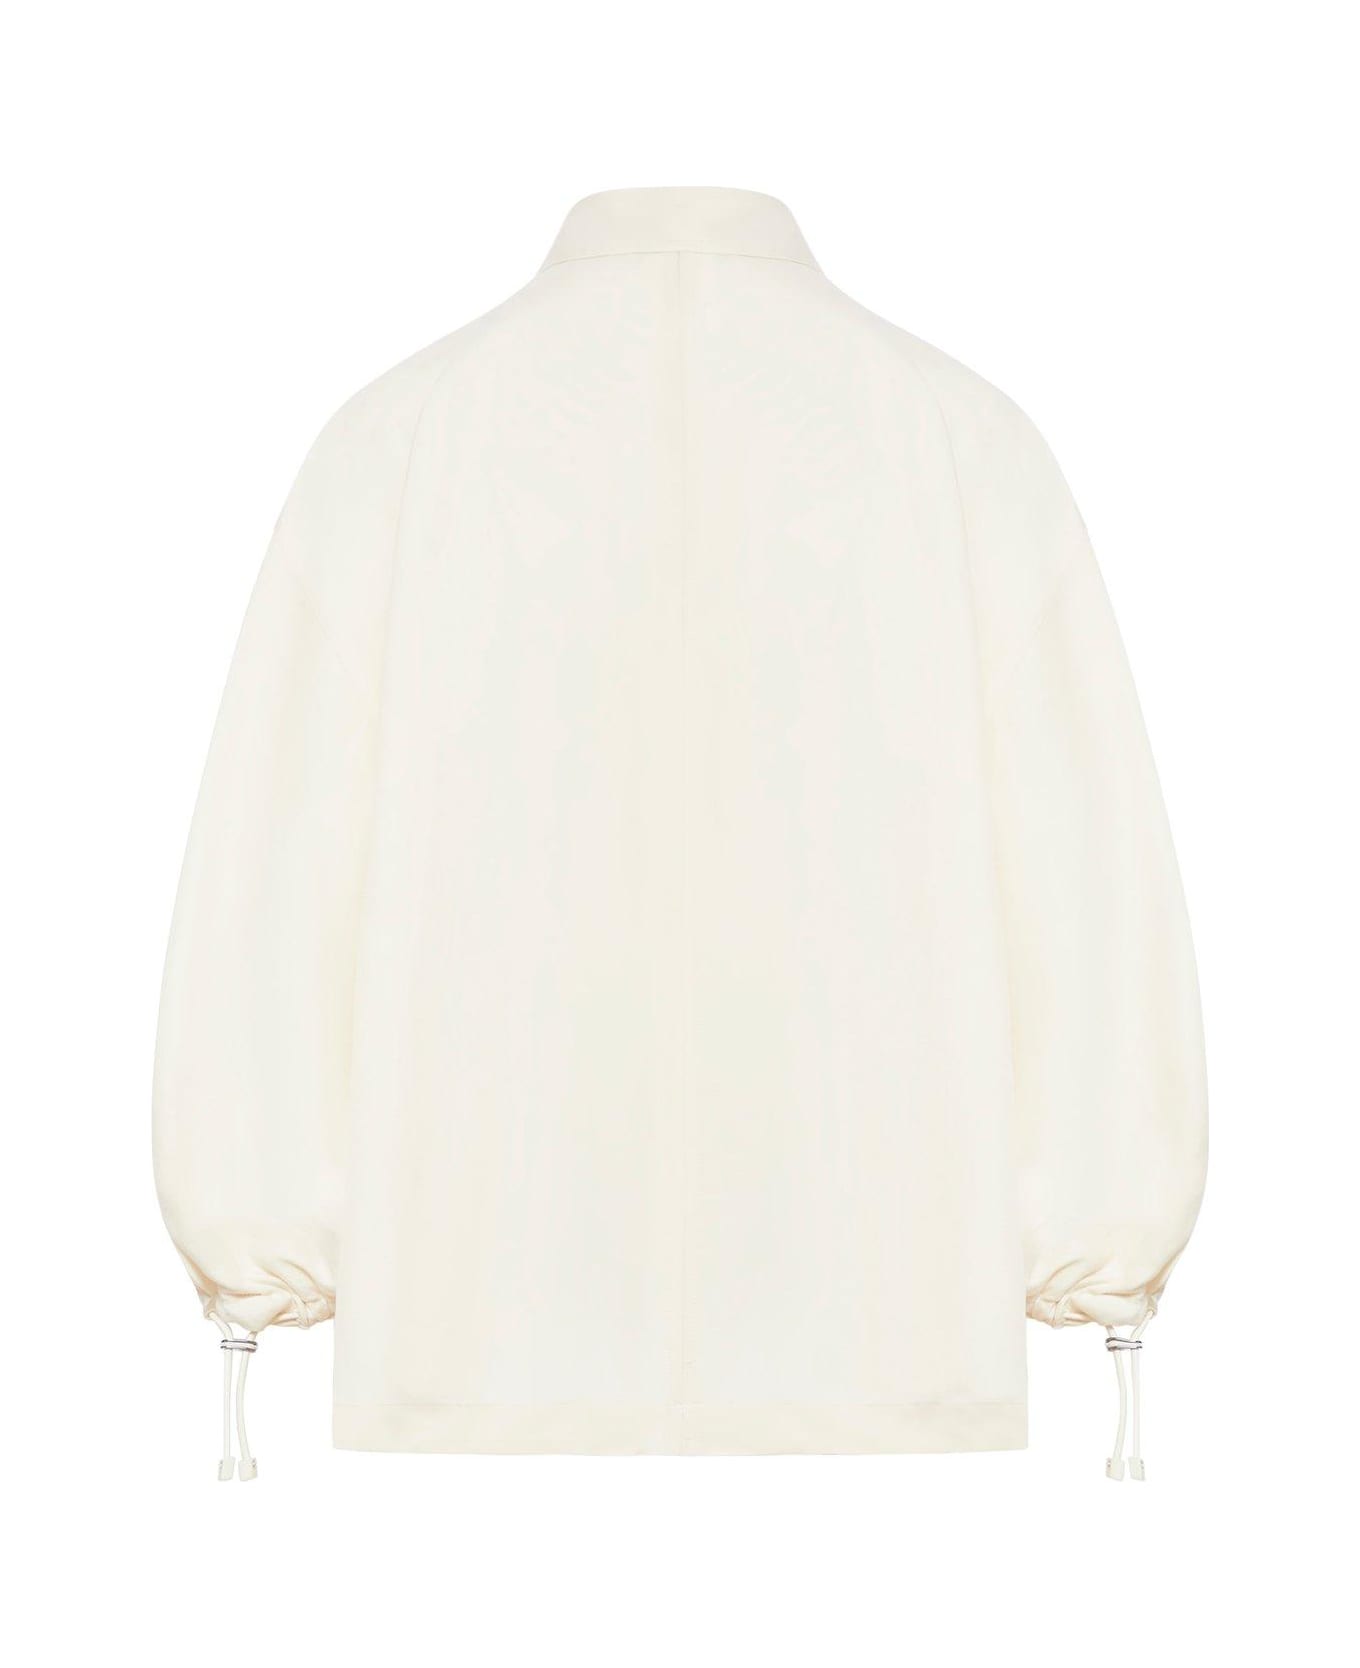 Max Mara Buttoned Long-sleeved Top - White Ivory